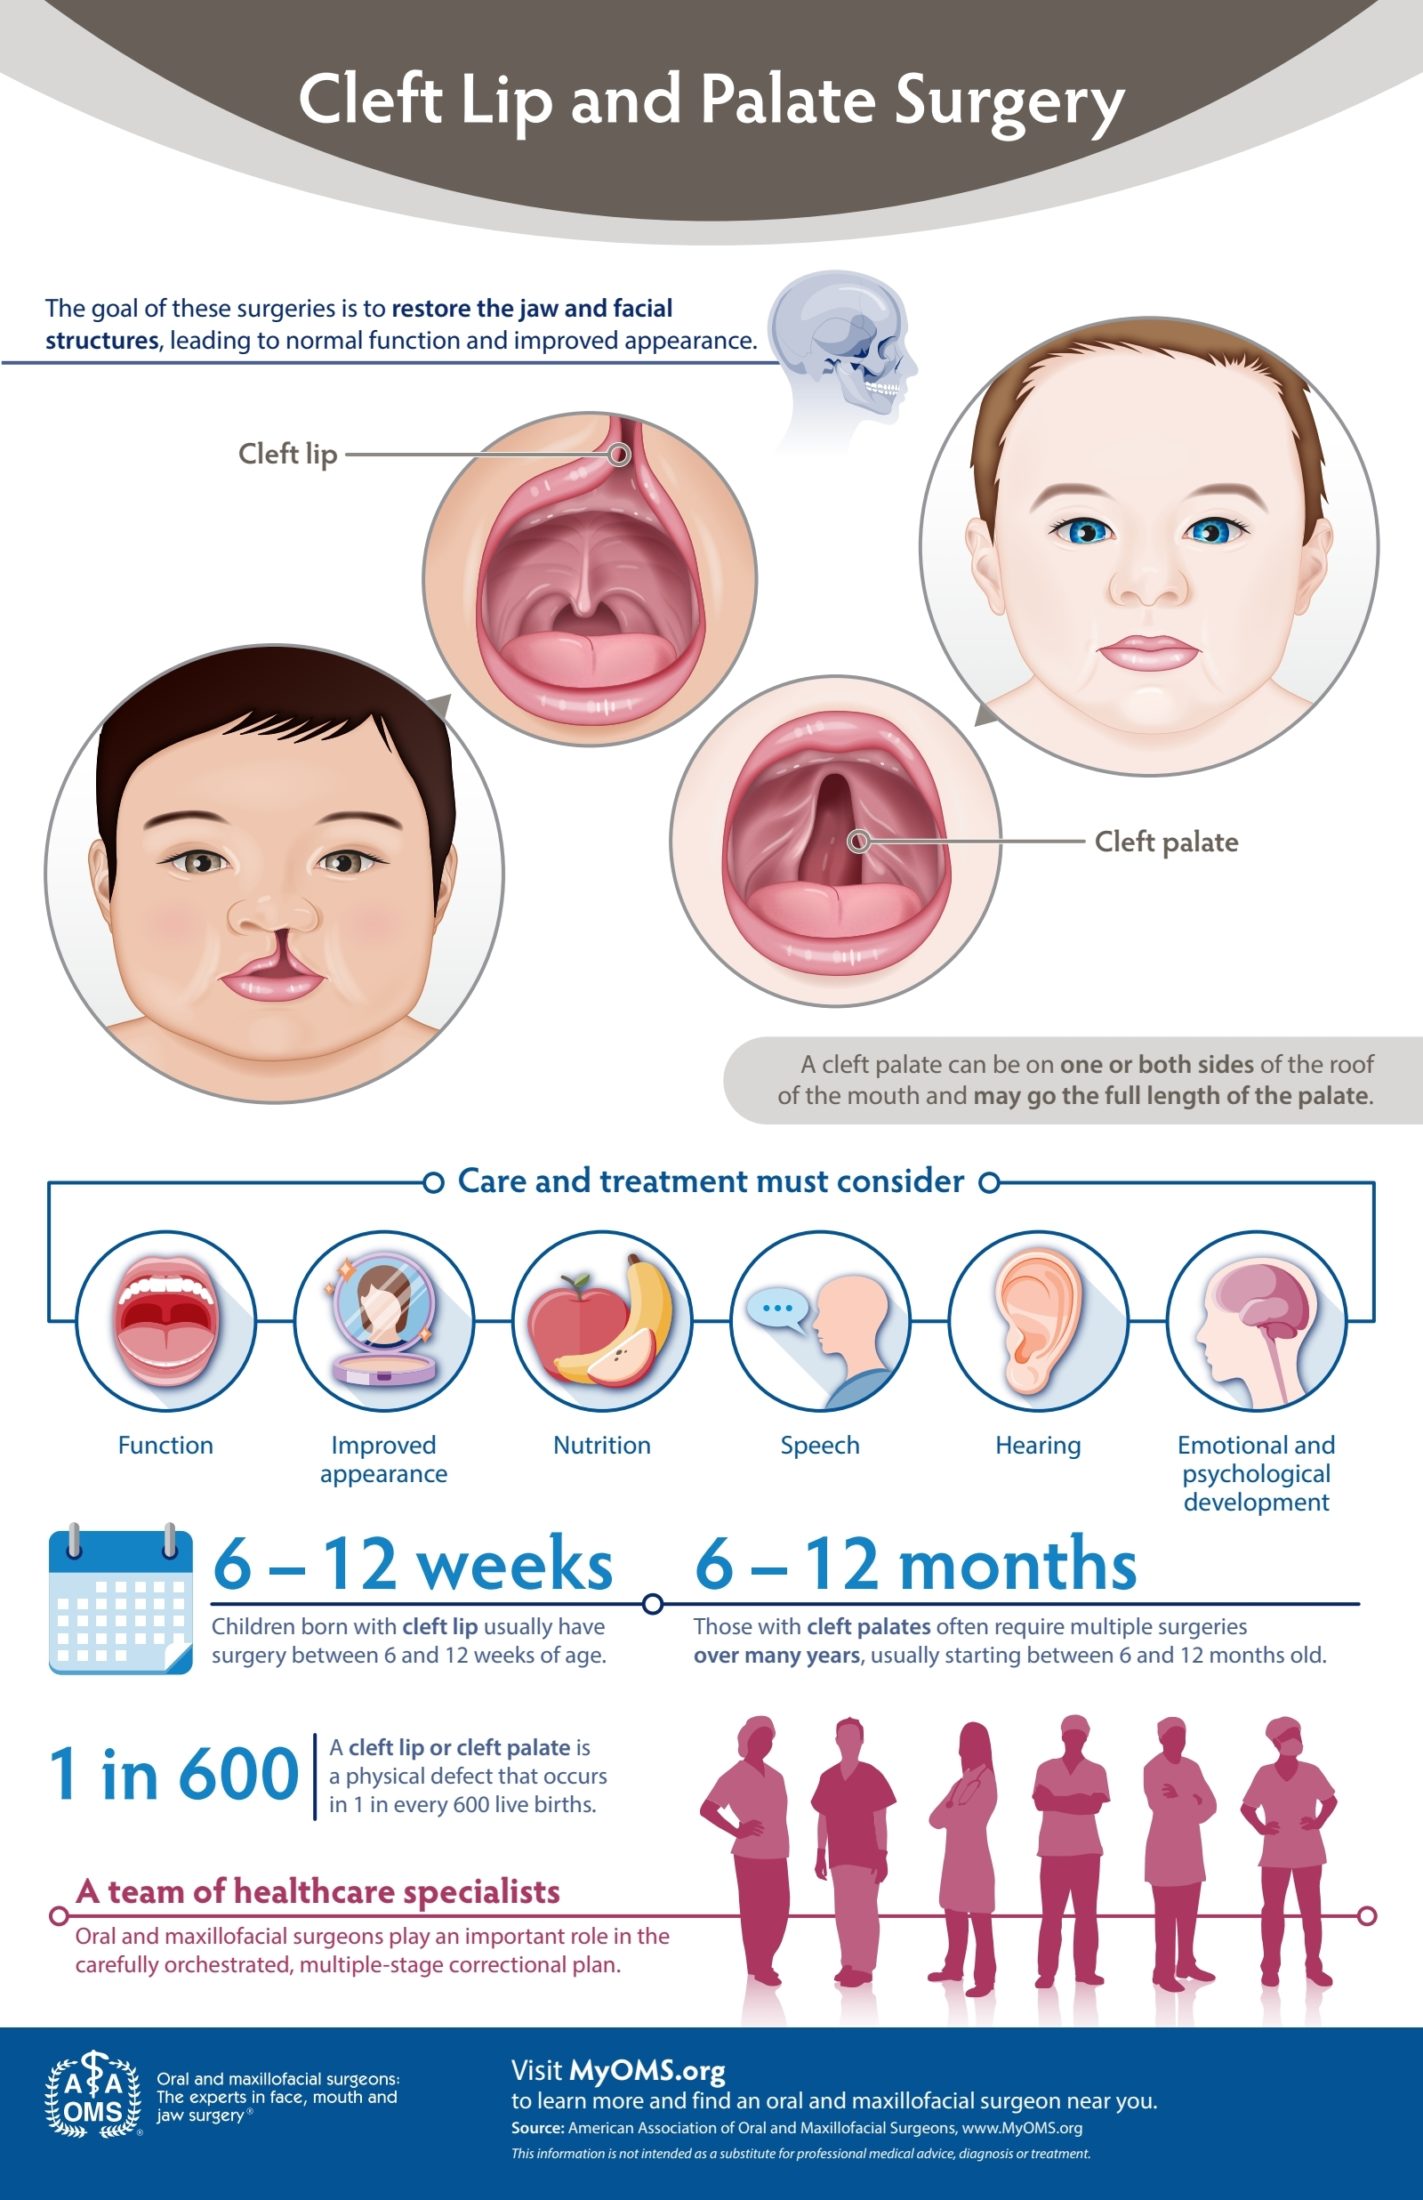 Cleft Lip and Palate Surgery Infographic